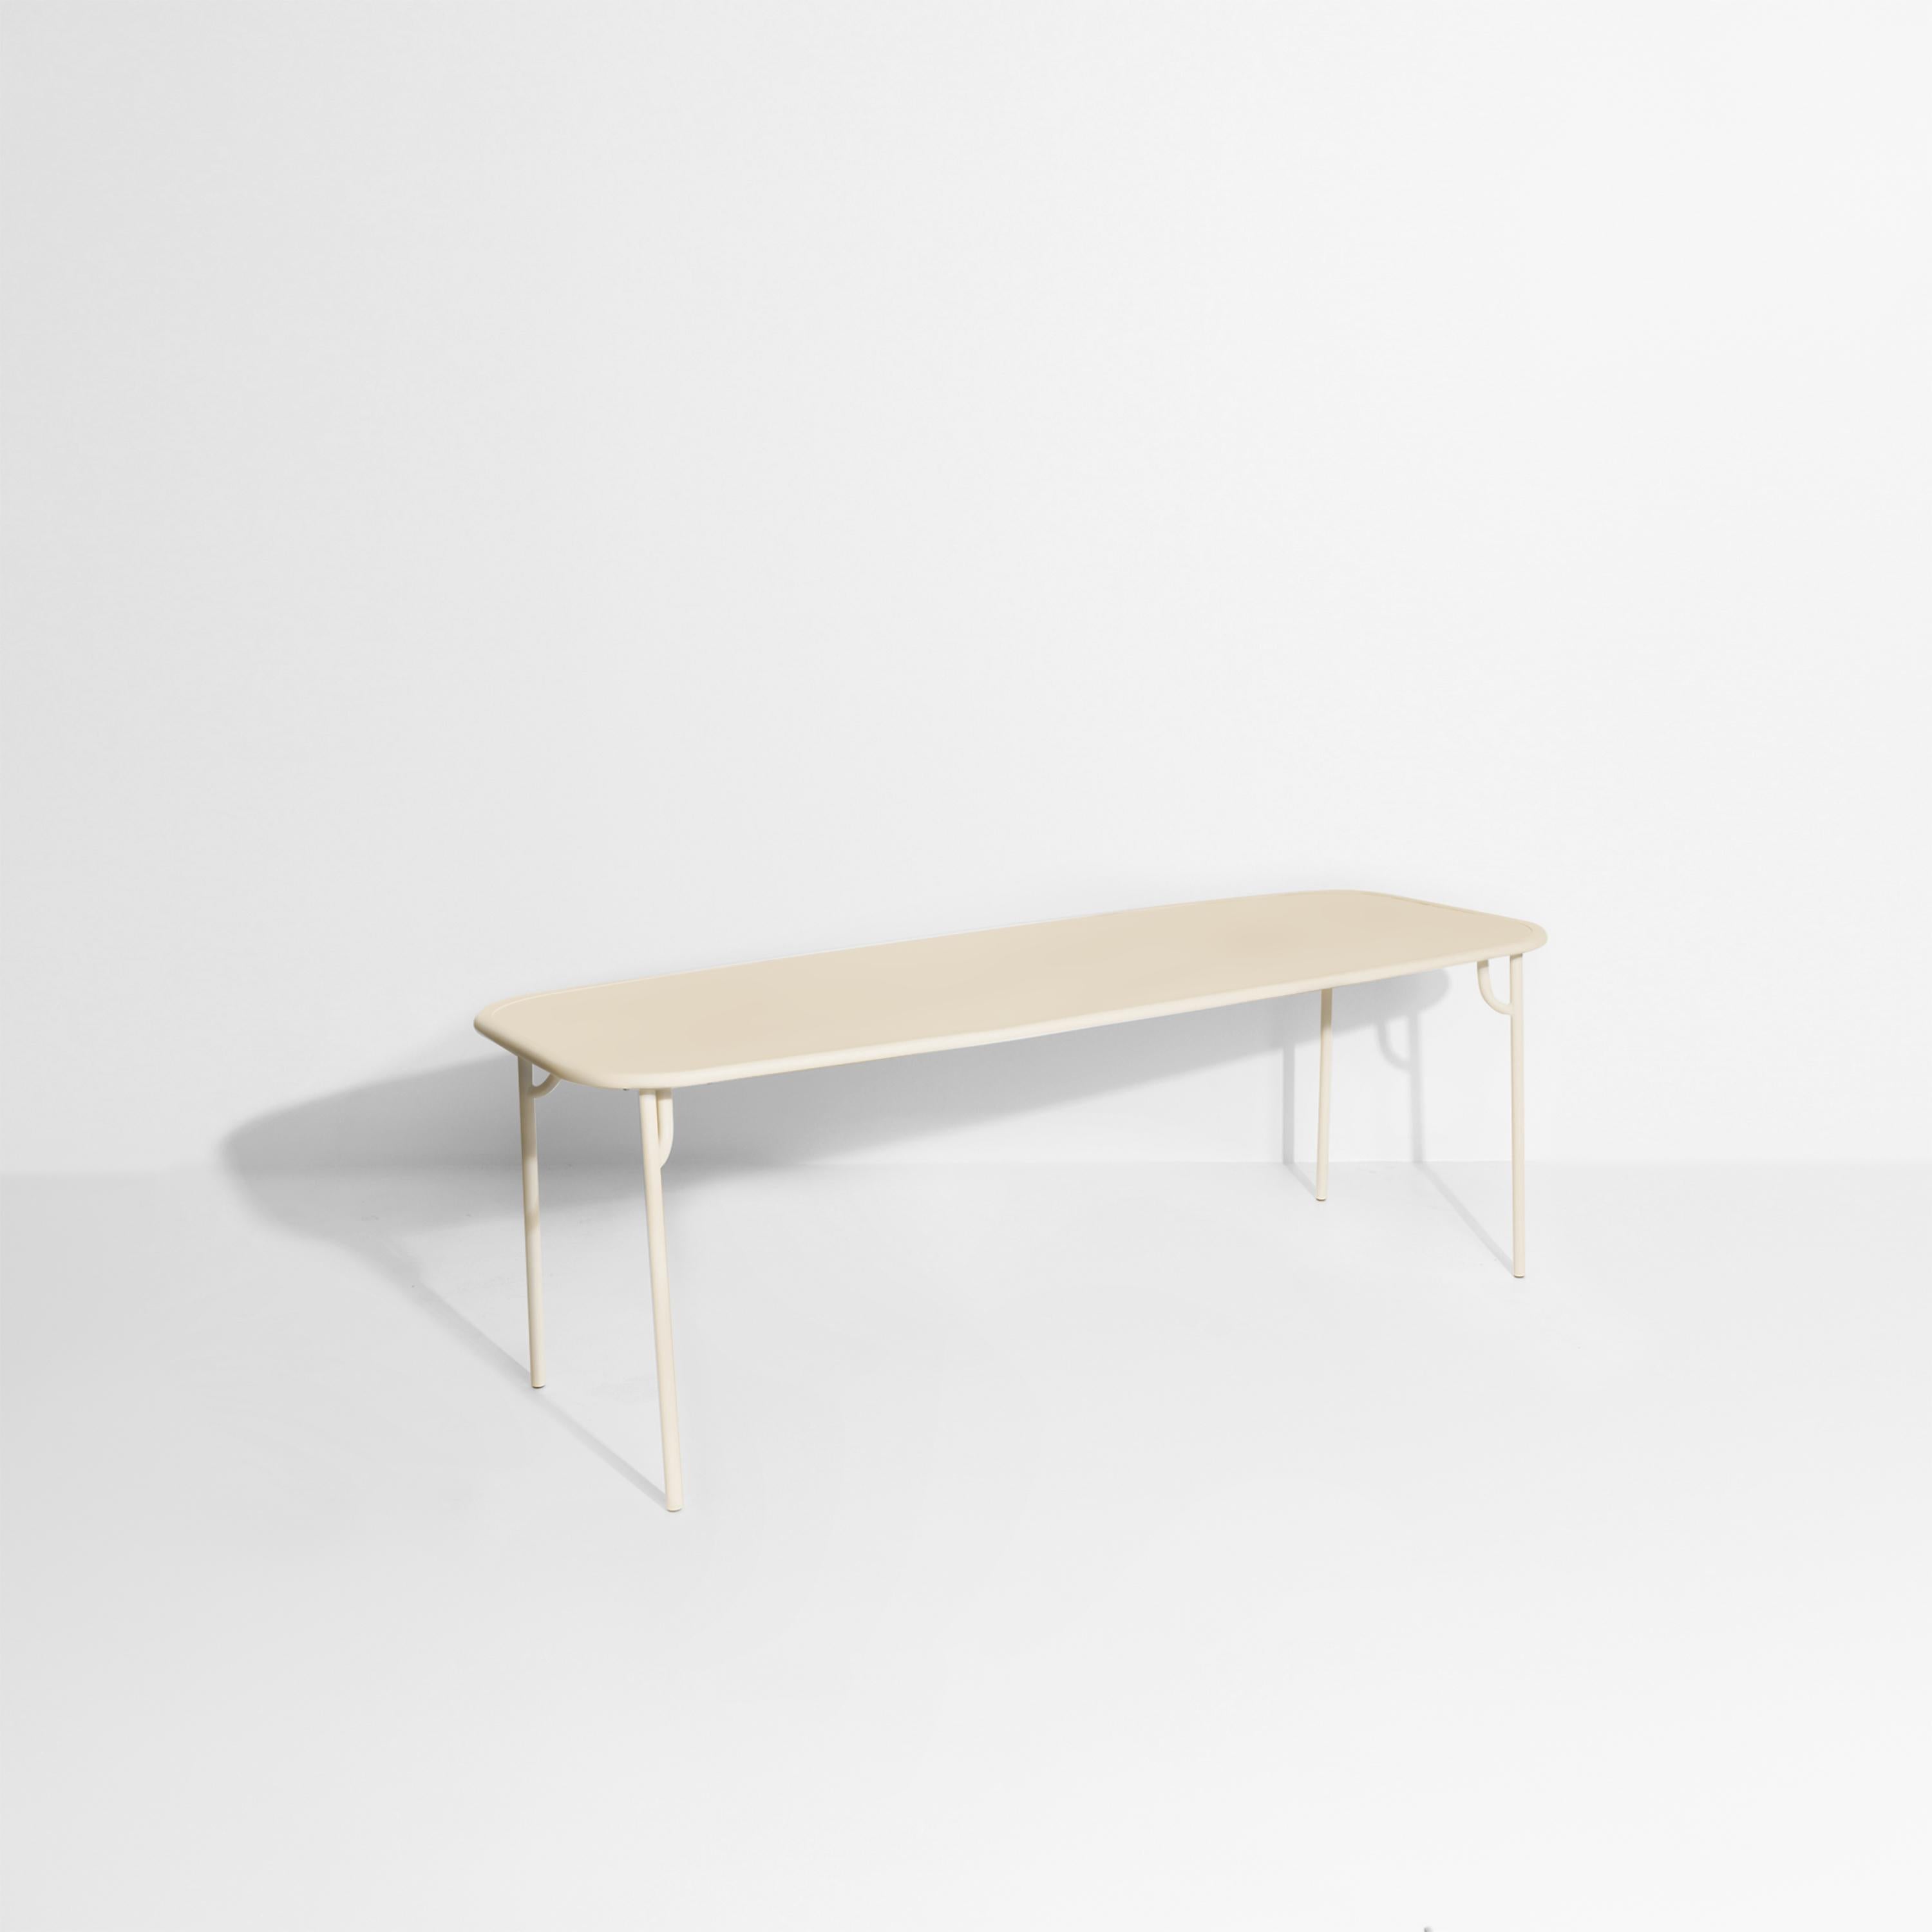 Petite Friture Week-End Large Plain Rectangular Dining Table in Ivory Aluminium by Studio BrichetZiegler, 2017

The week-end collection is a full range of outdoor furniture, in aluminium grained epoxy paint, matt finish, that includes 18 functions